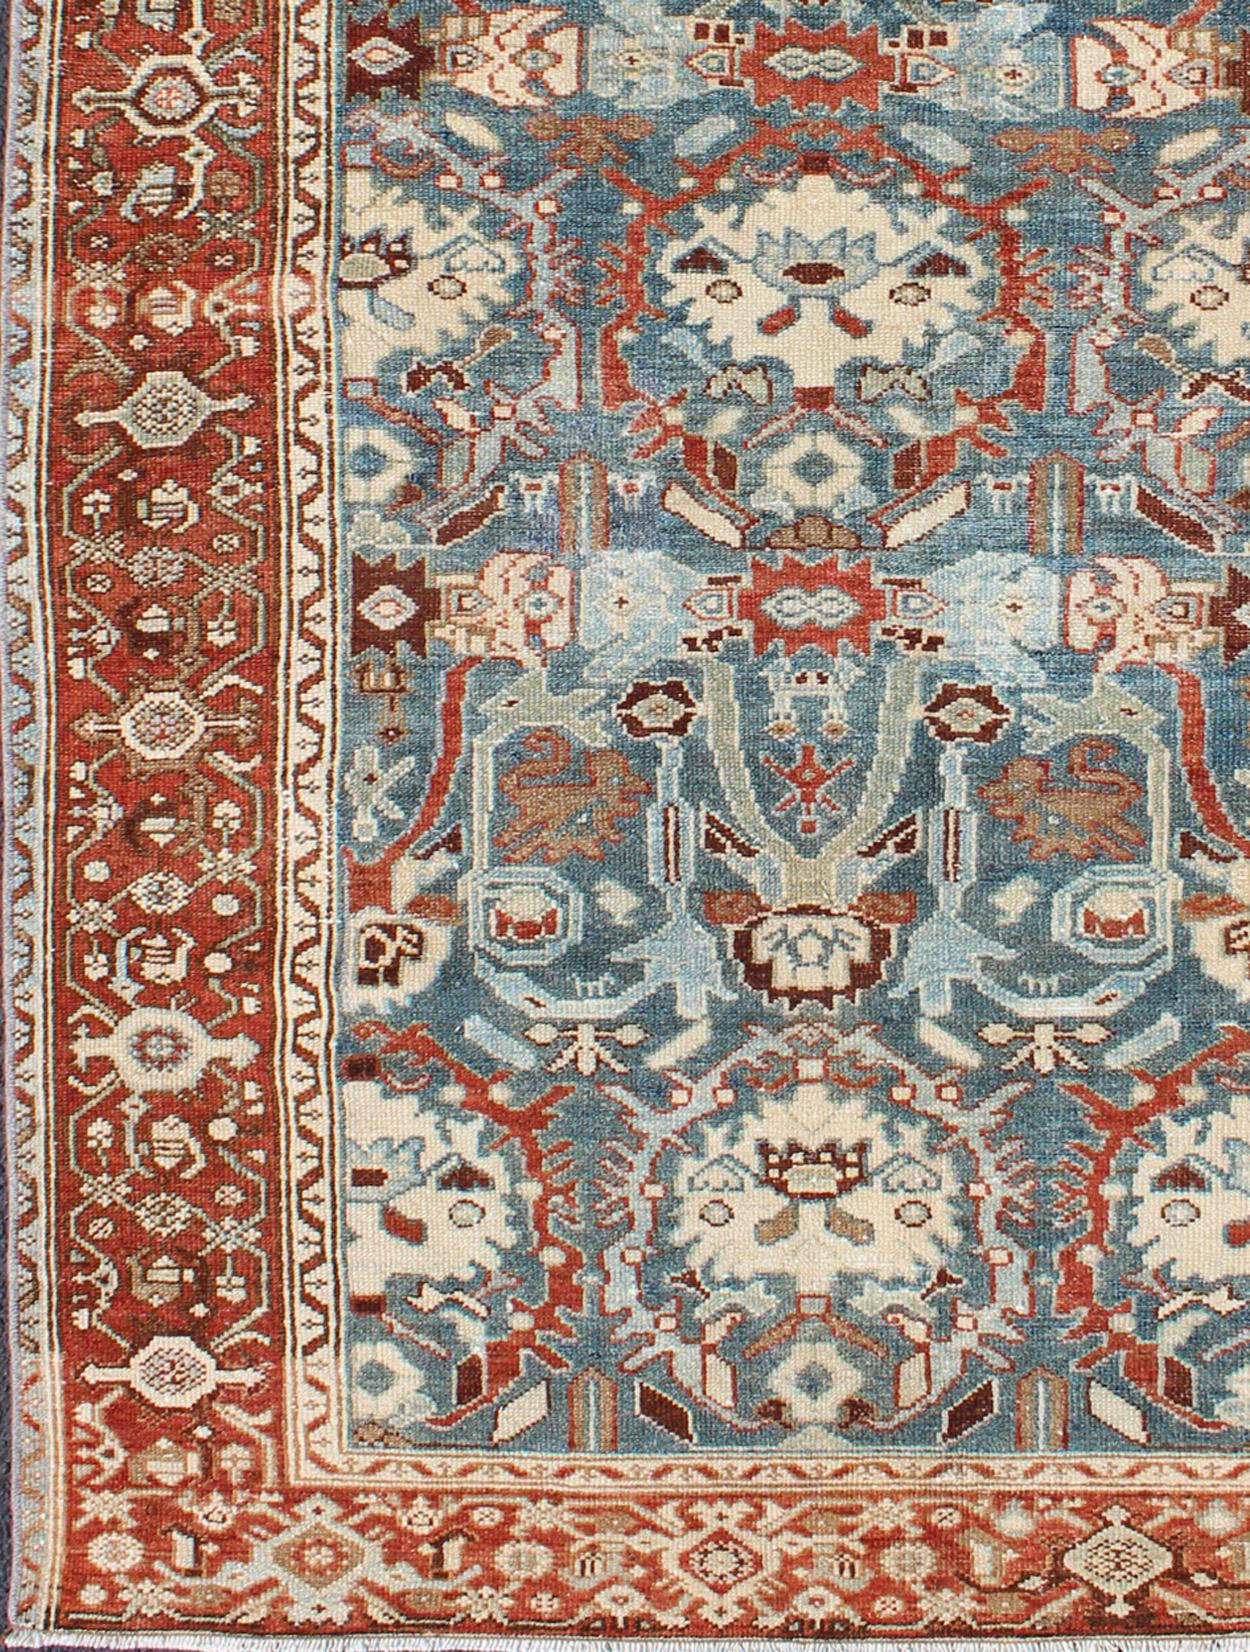 Red and blue floral design Persian Antique Malayer rug, rug sus-1807-243, country of origin / type: Iran / Malayer, circa 1920.

This beautiful antique early 20th century Persian Malayer carpet features a beautiful all-over design of